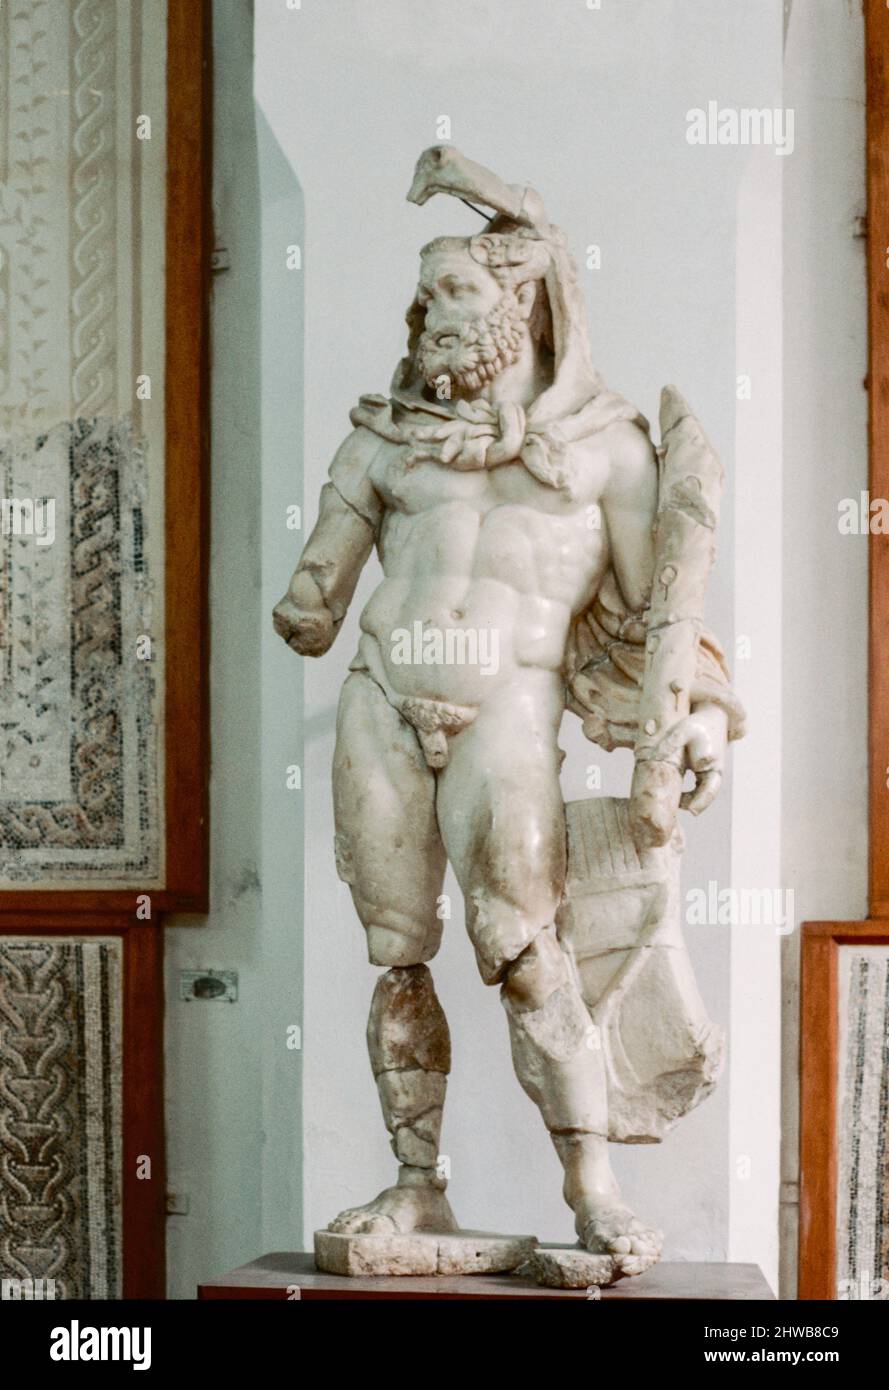 Archive scan of Archaeological Site in Carthage. Ruins of the capital city of the ancient Carthaginian civilisation, now Tunisia. Hercules sculpture, Bardo National Museum. April Stock Photo - Alamy